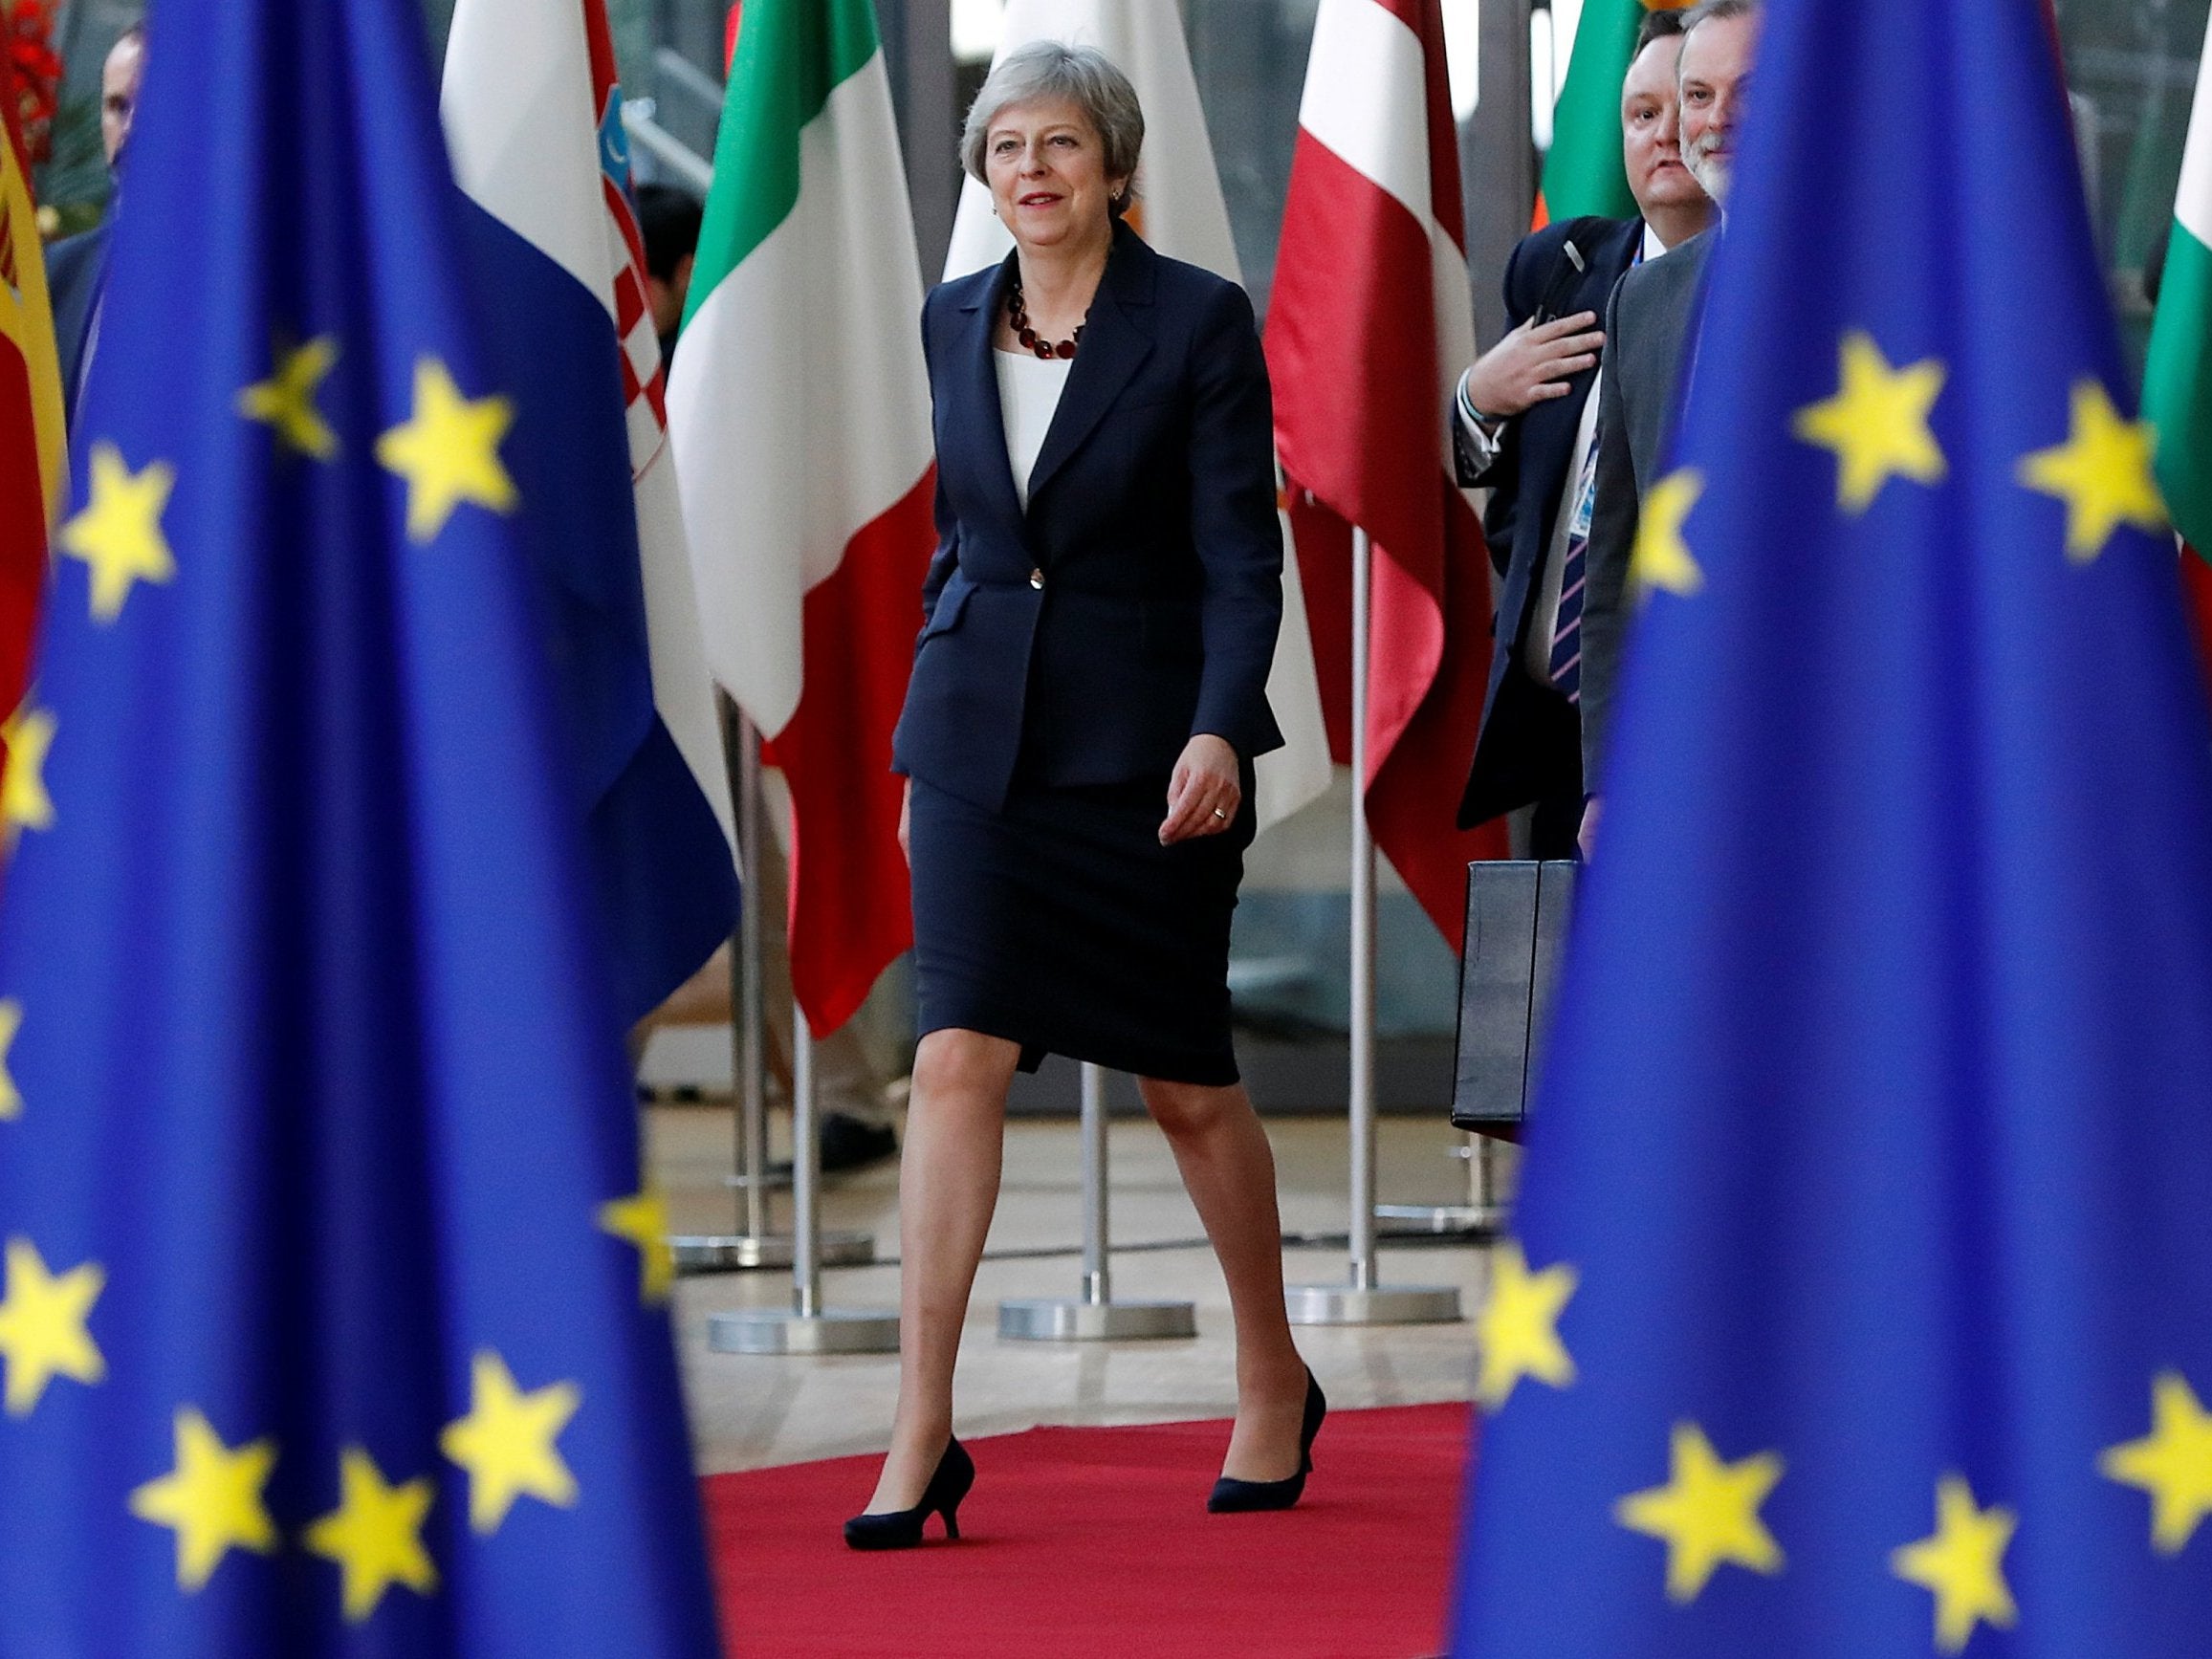 Theresa May arrives at the European Council summit in Brussels